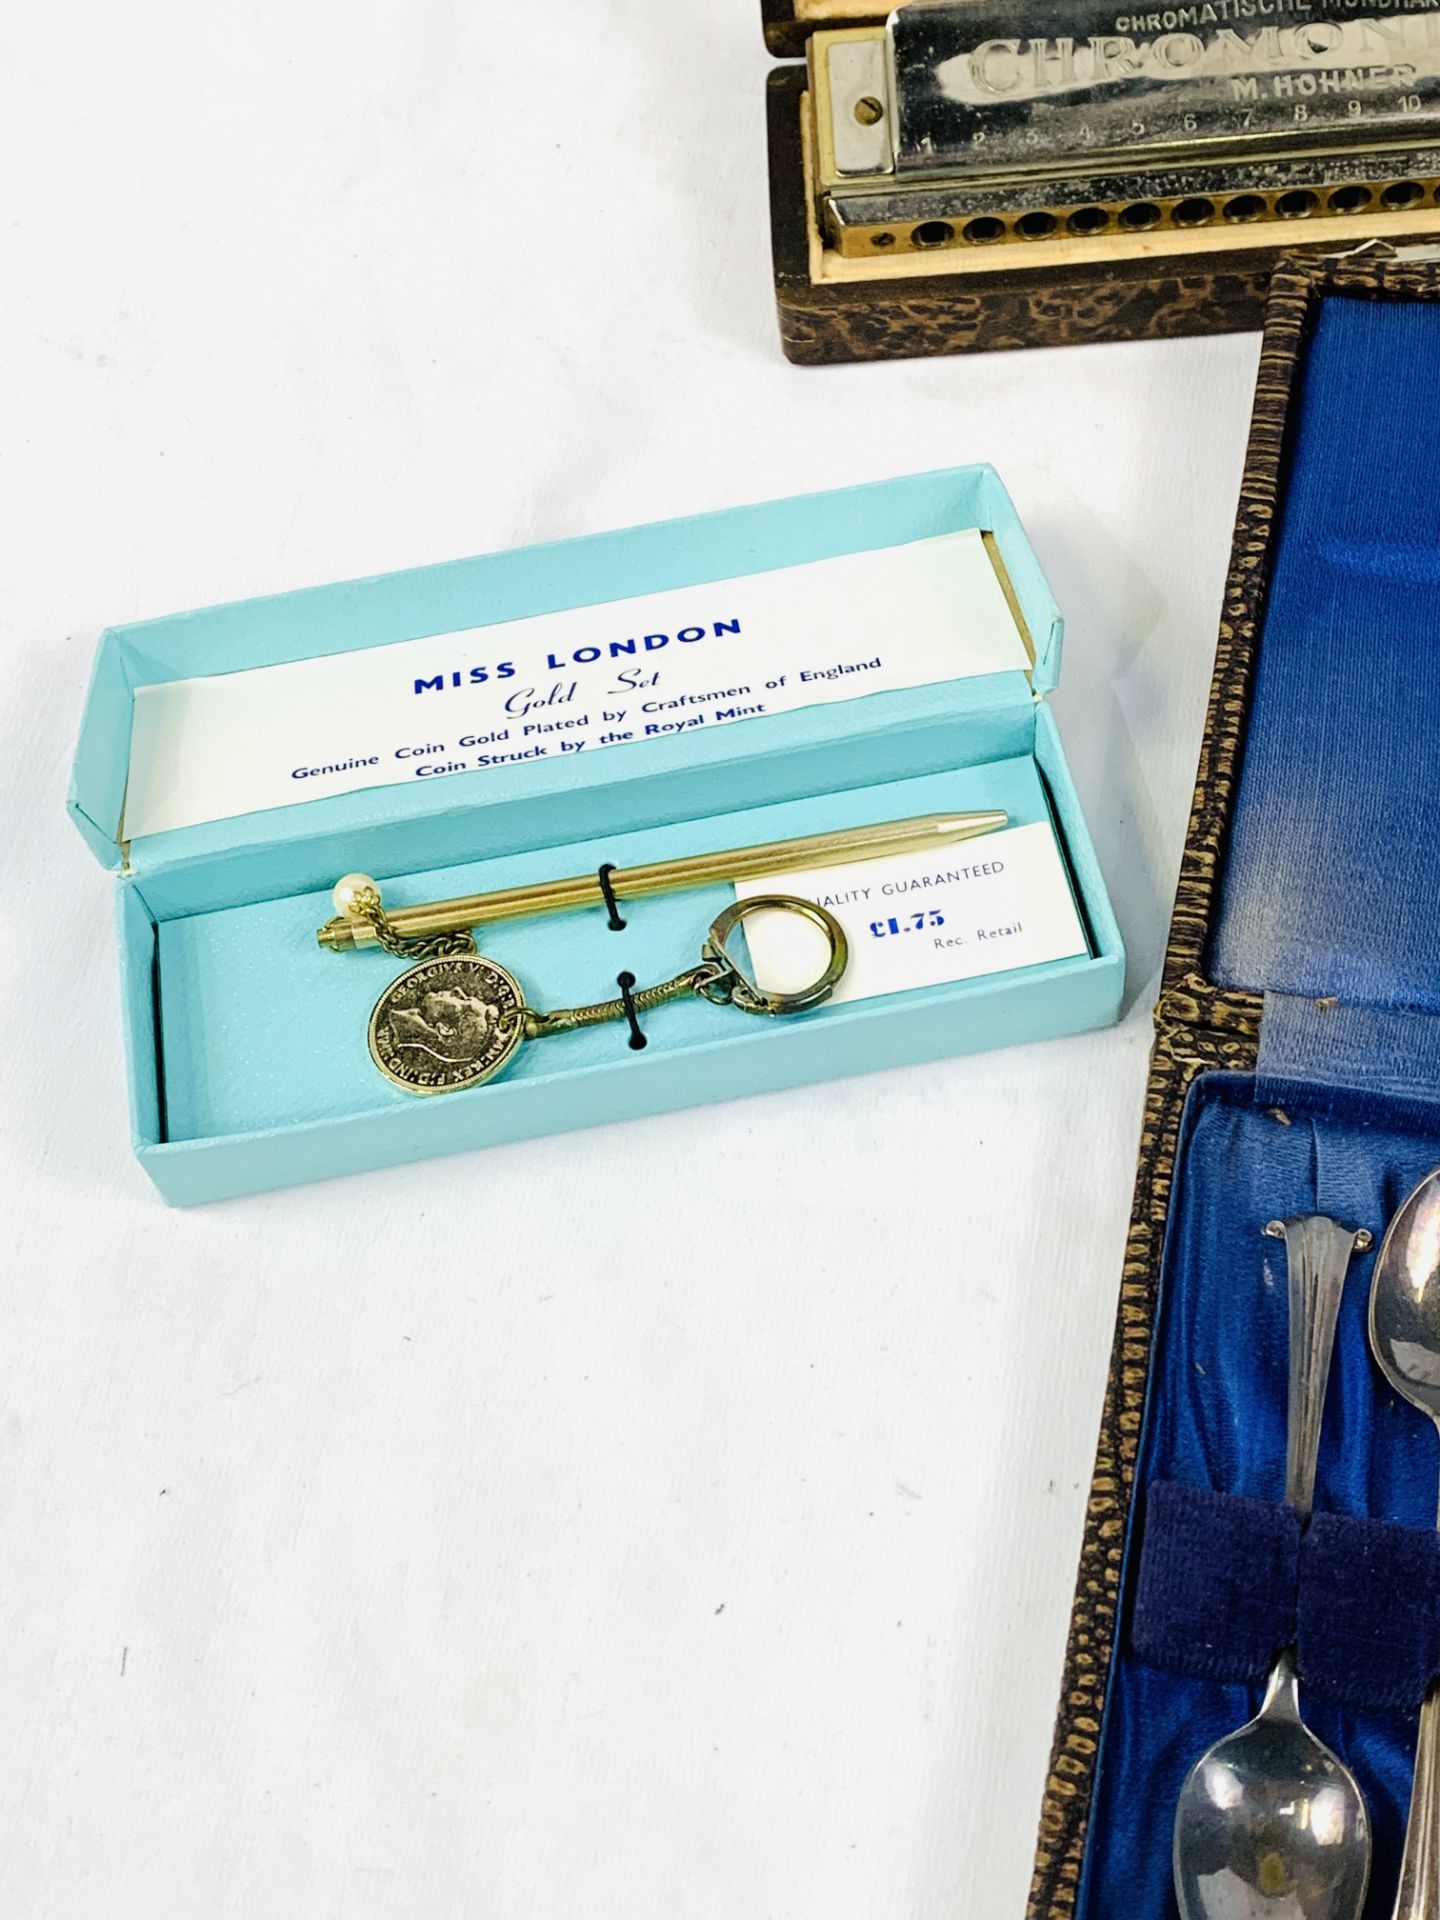 Hohner Chromonika III harmonica in original box; 2 cased spoon sets and other items - Image 4 of 4